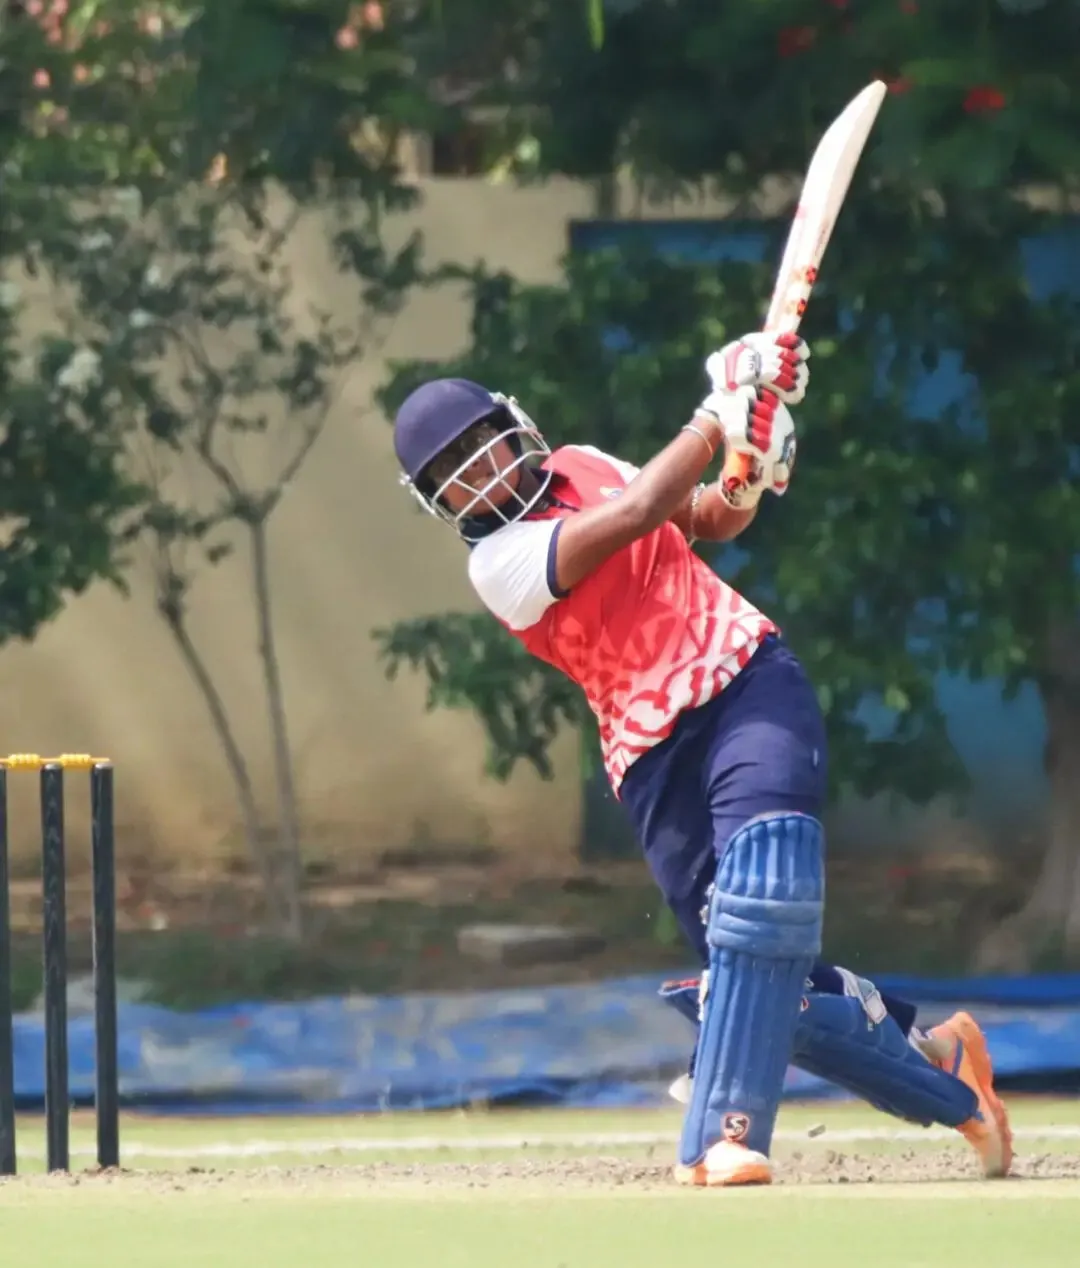 Bristi Maji goes for a big shot against Nadia District in the final | Women's Cricket: Nadia district women's team beat Howrah to win their 4th consecutive T20 title | Sportz Point